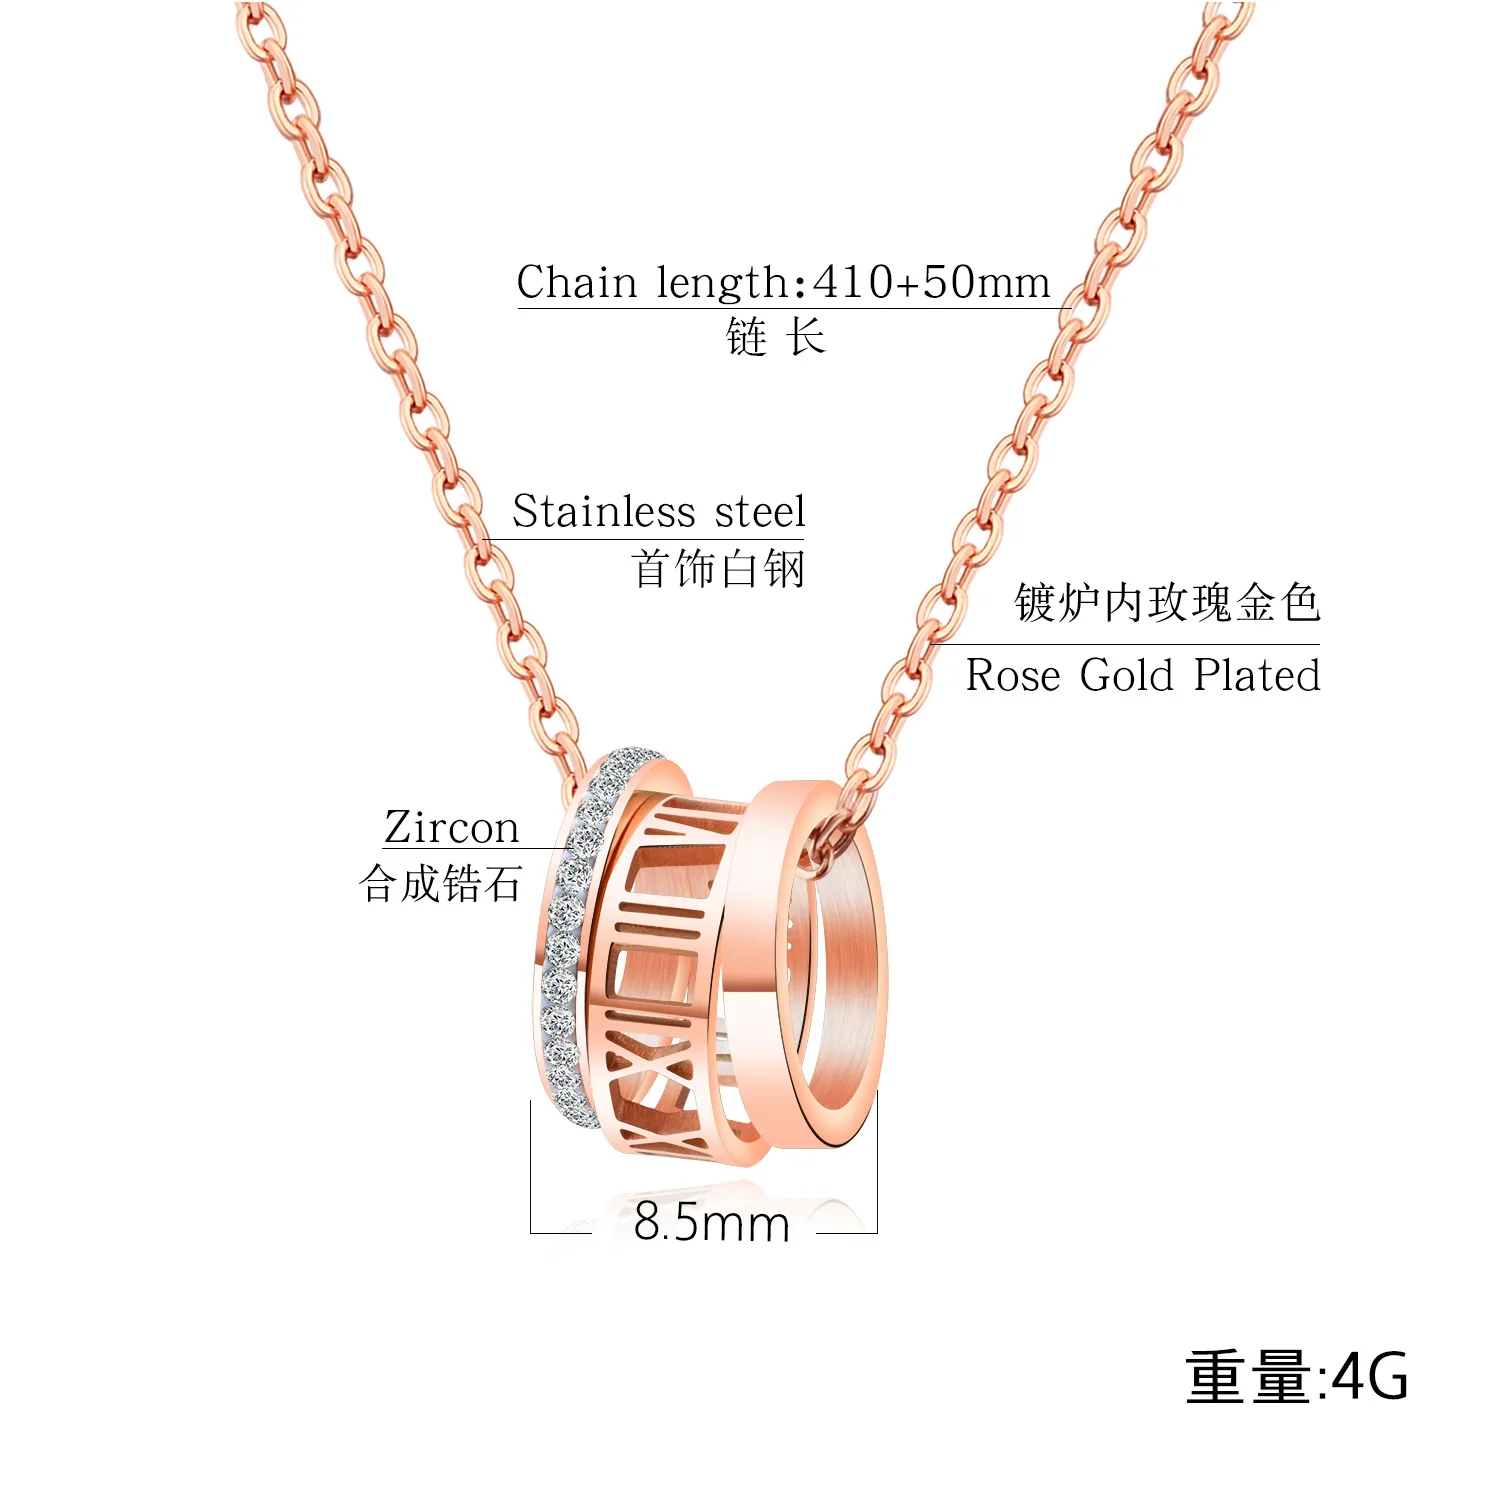 

CH-111 Three Rings Full Diamond Roman Numeral Pendant Necklace Titanium Steel Rose Gold Plated Short Clavicle Chain